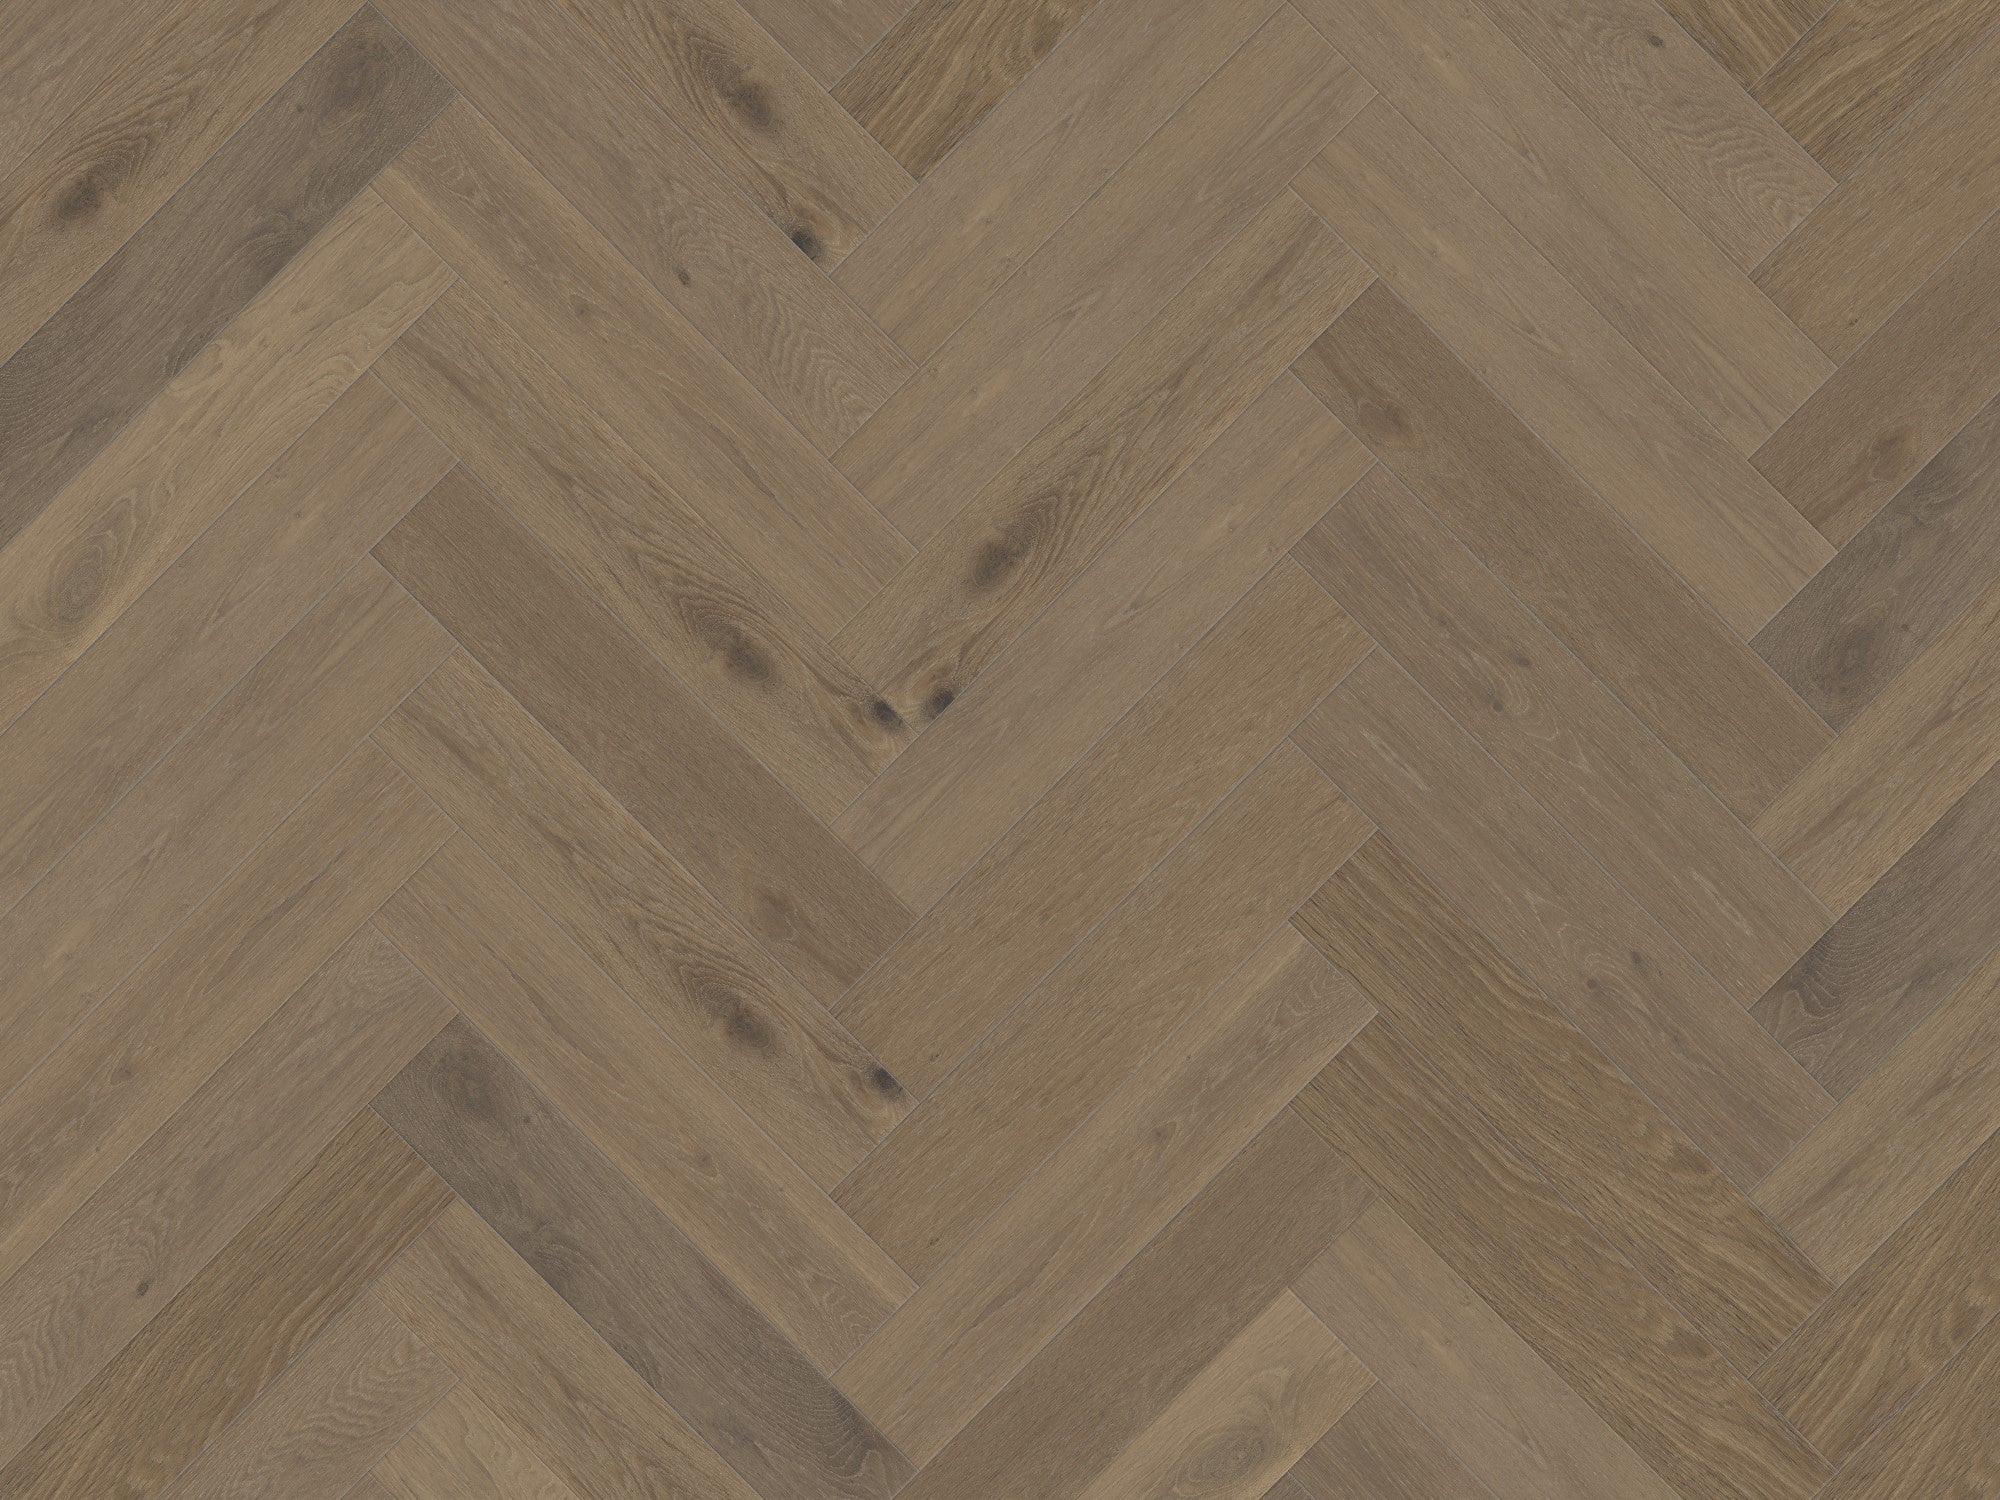 duchateau signature terra chaparral herringbone european oak engineered hardnatural wood floor uv lacquer finish for interior use distributed by surface group international